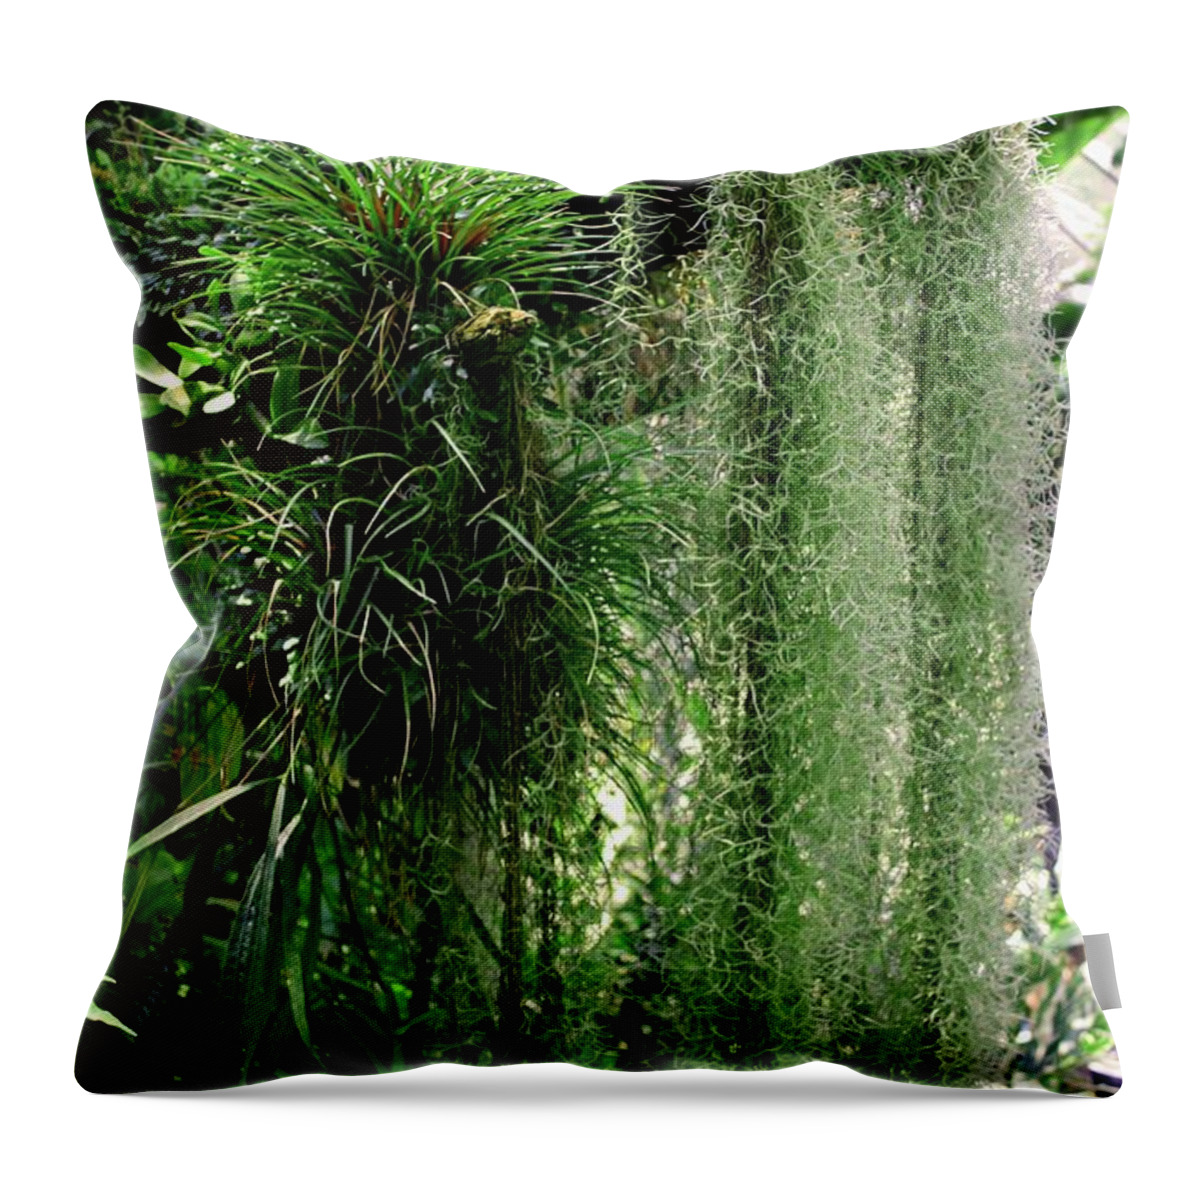 Green Throw Pillow featuring the photograph Wicked Whipser by Michiale Schneider